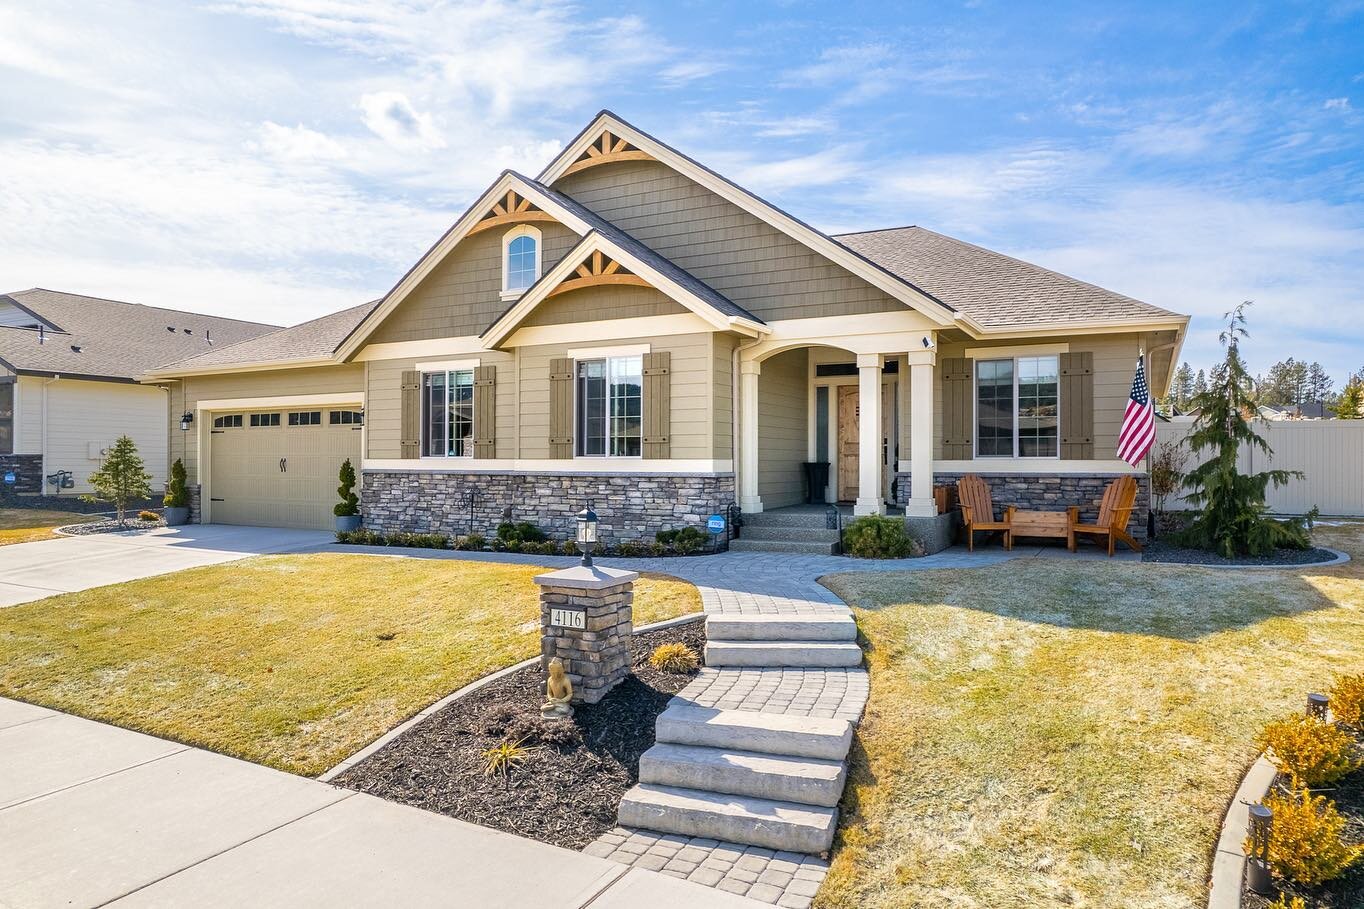 Check out this beautiful new listing coming soon from @sourcerealestate1 ✨

#realestatephotography #spokane #spokanerealestate